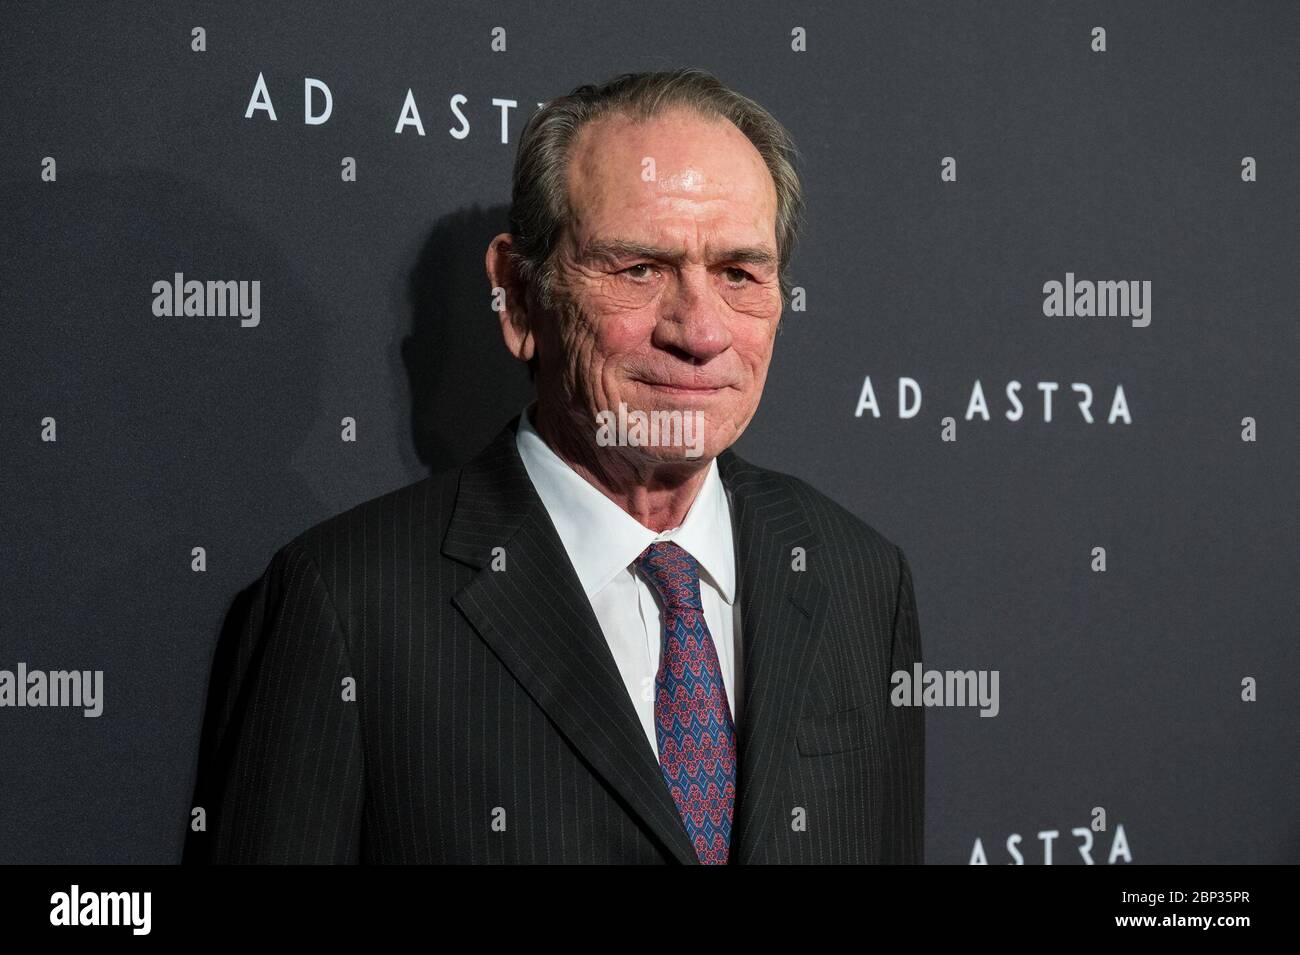 Ad Astra" Screening at National Geographic Actor Tommy Lee Jones arrives on  the red carpet for